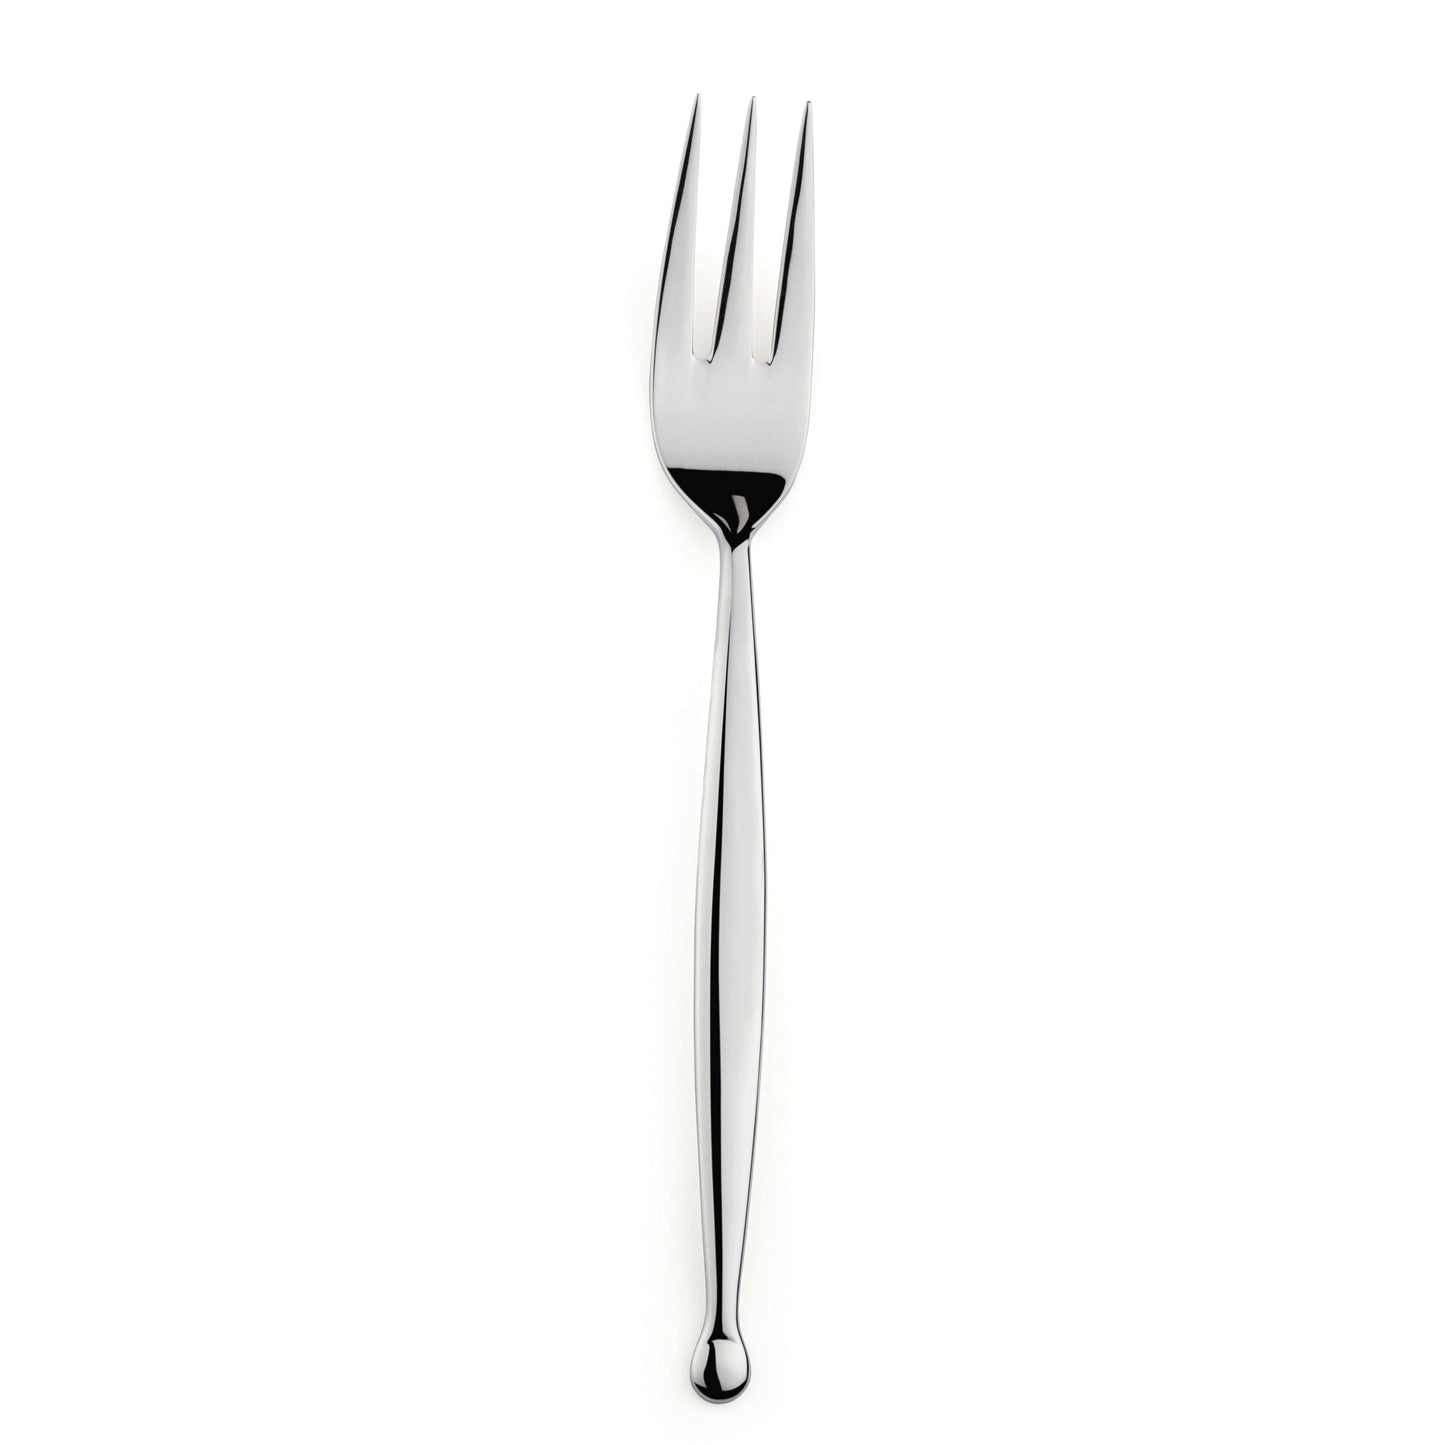 Elia Jester Serving Fork 18/10 Stainless Steel Case Size 2